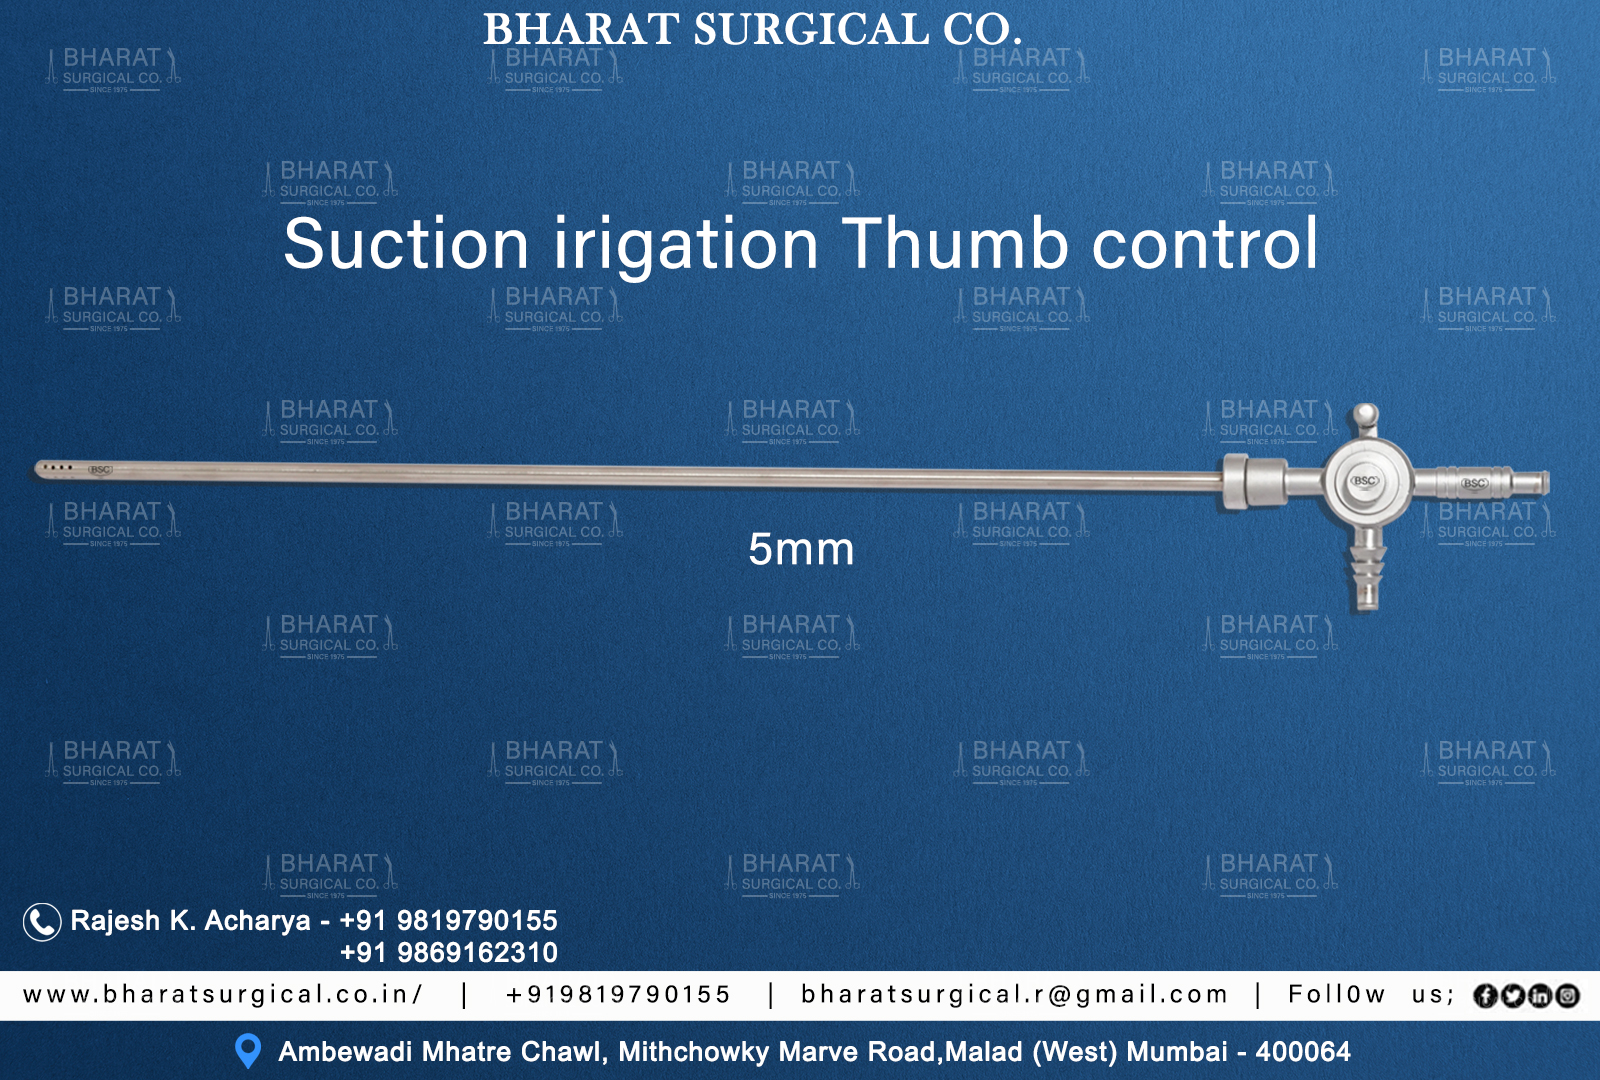 Suction Irrigation Thumb Control 5mm manufacturers suppliers and exporters.